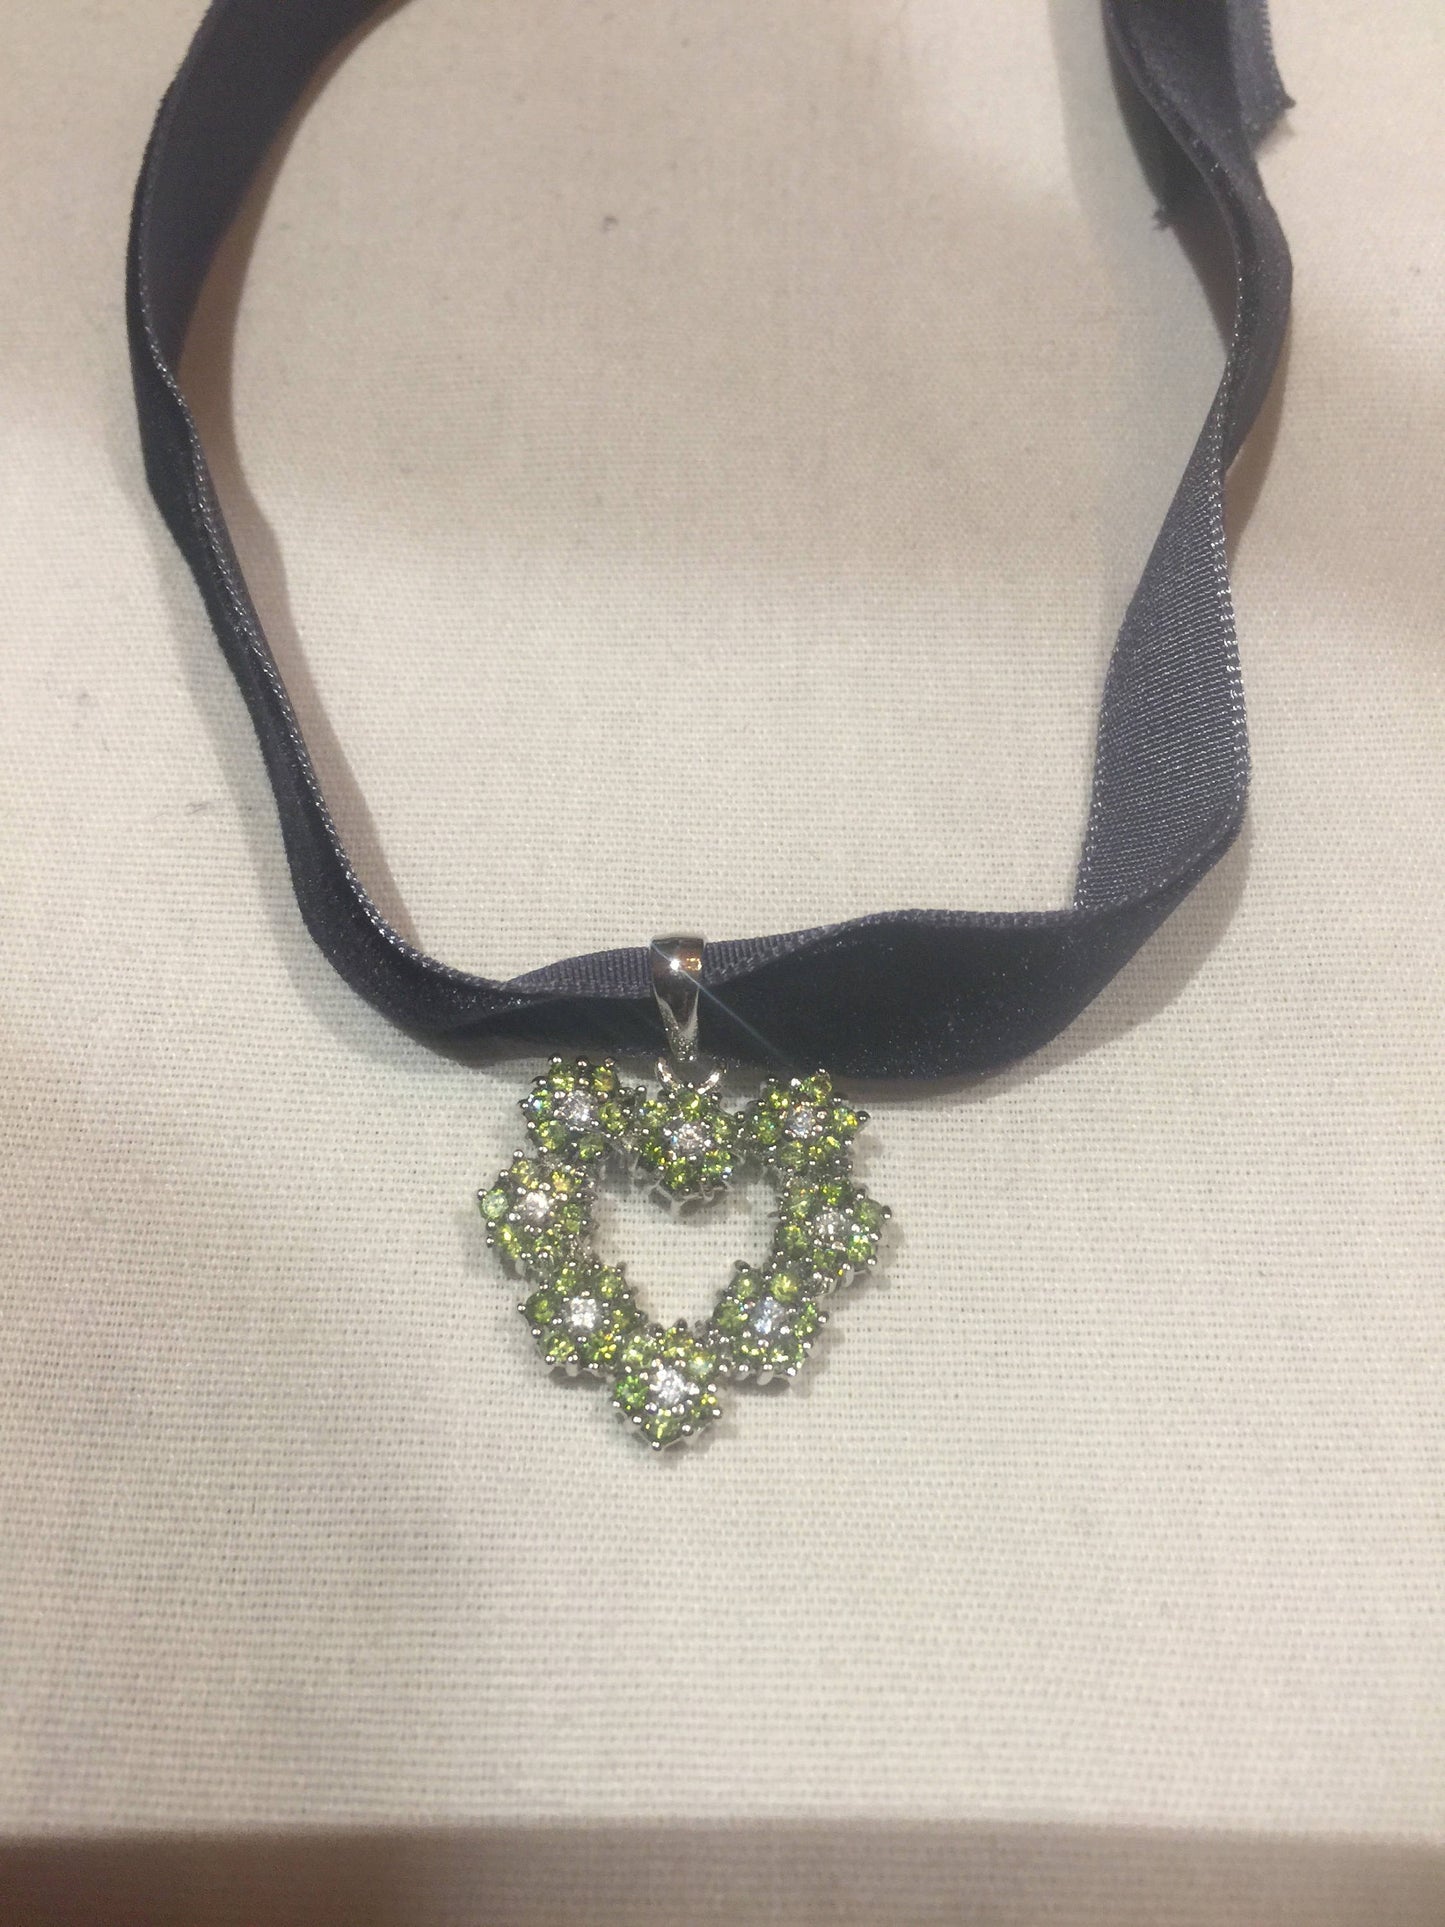 Vintage 925 Sterling Silver Green Peridot Heart Pendant Necklace